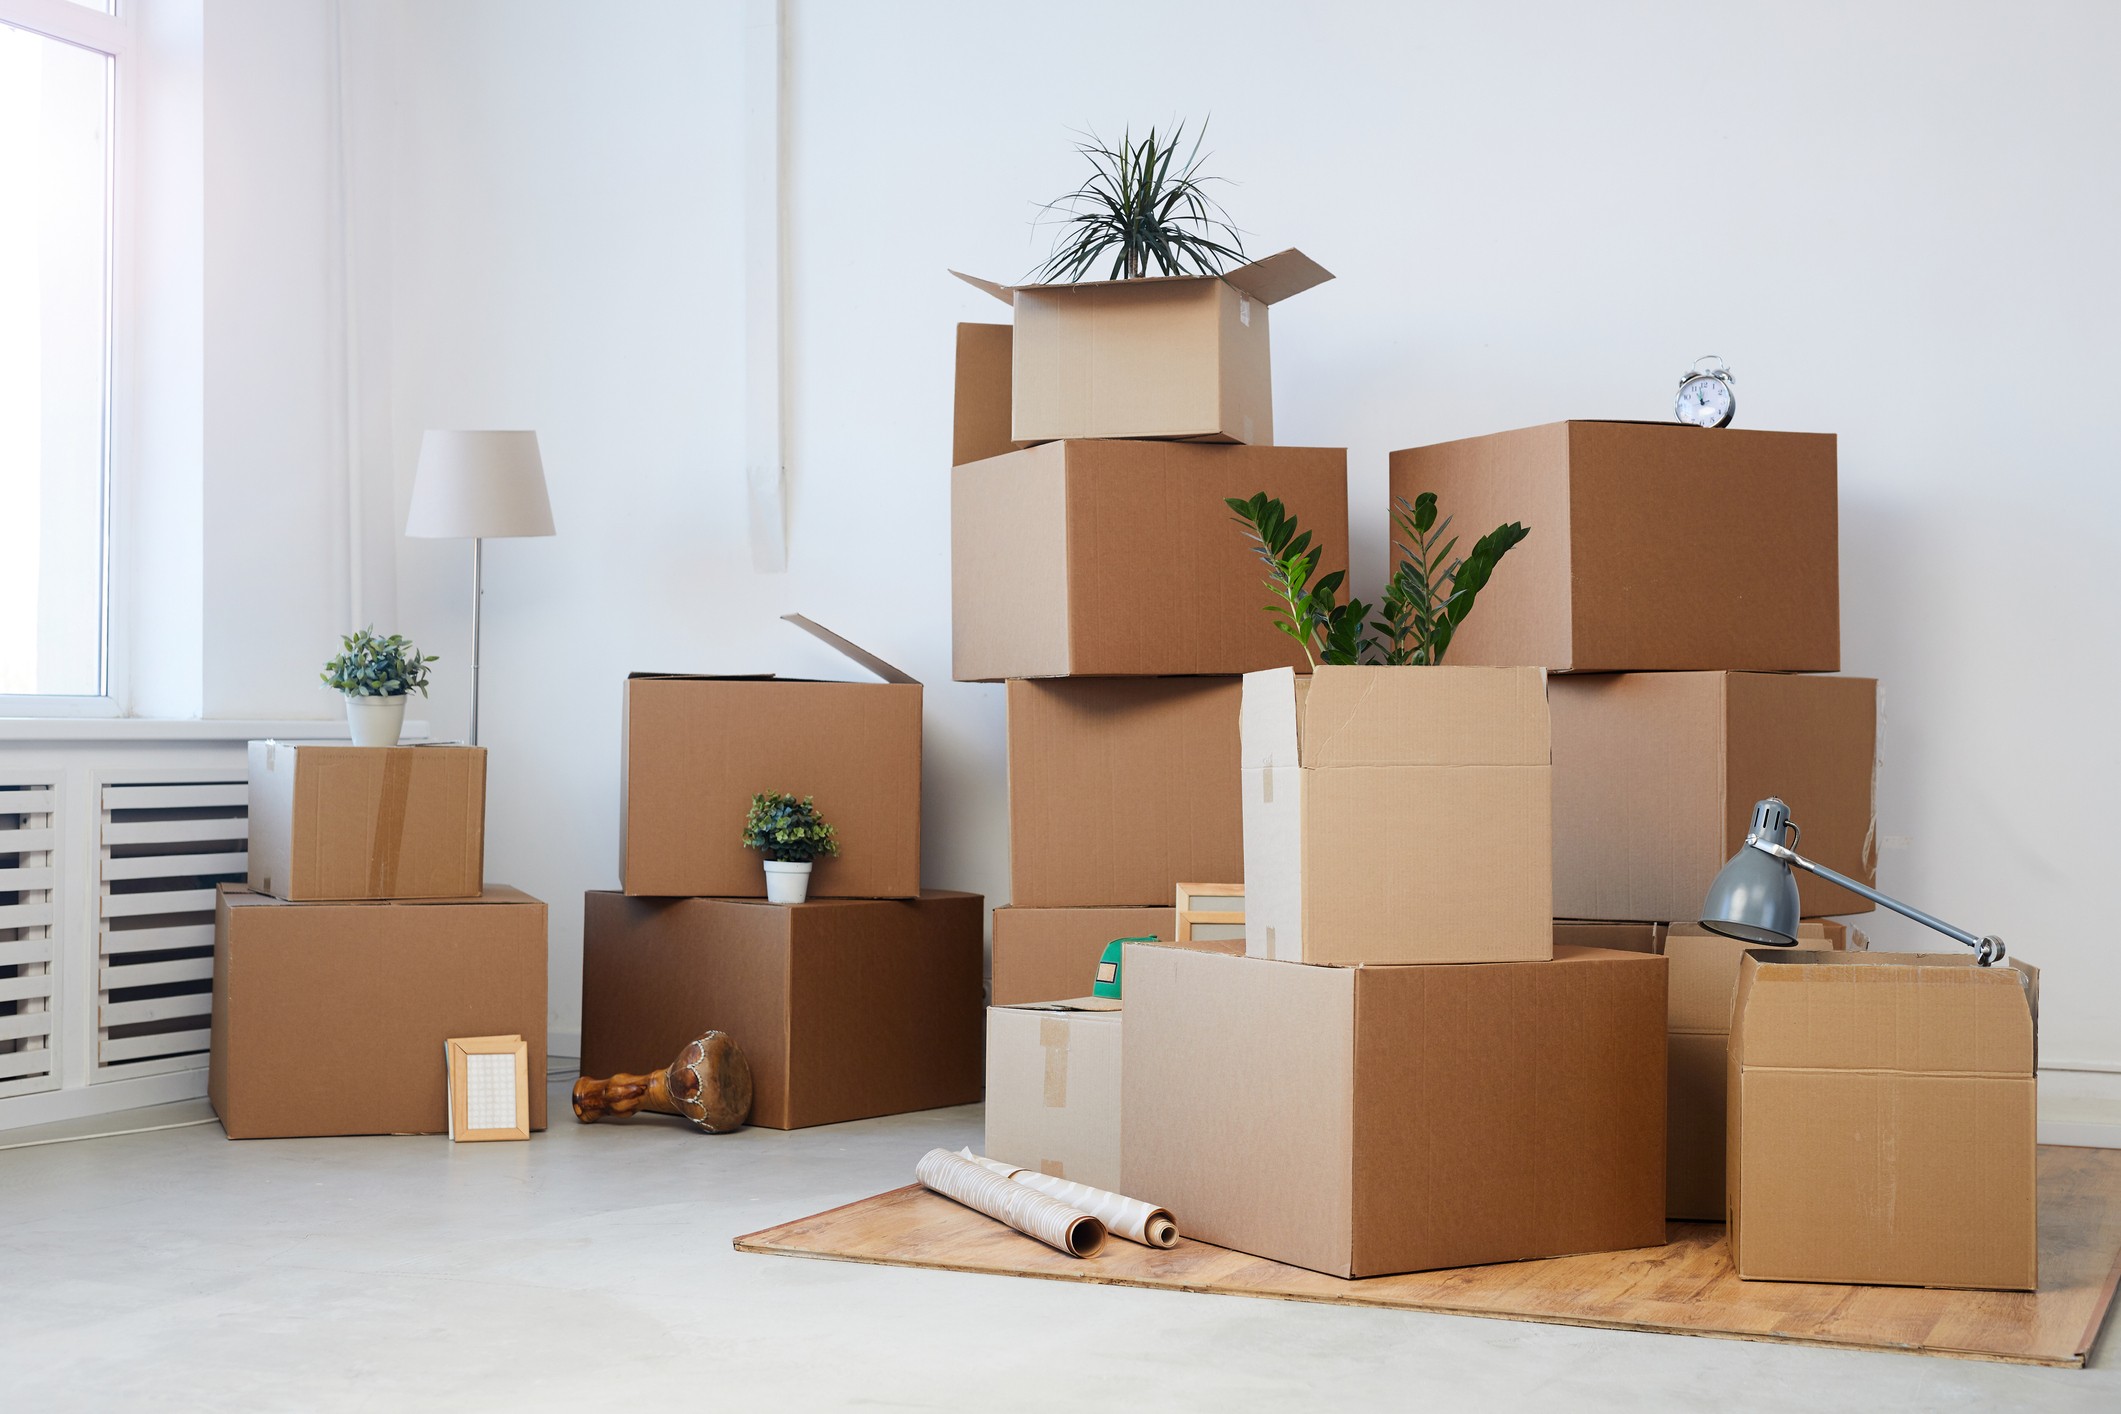 Minimal background image of cardboard boxes stacked in empty room with plants and personal belongings inside, moving or relocation concept, copy space (Foto: Getty Images/iStockphoto)